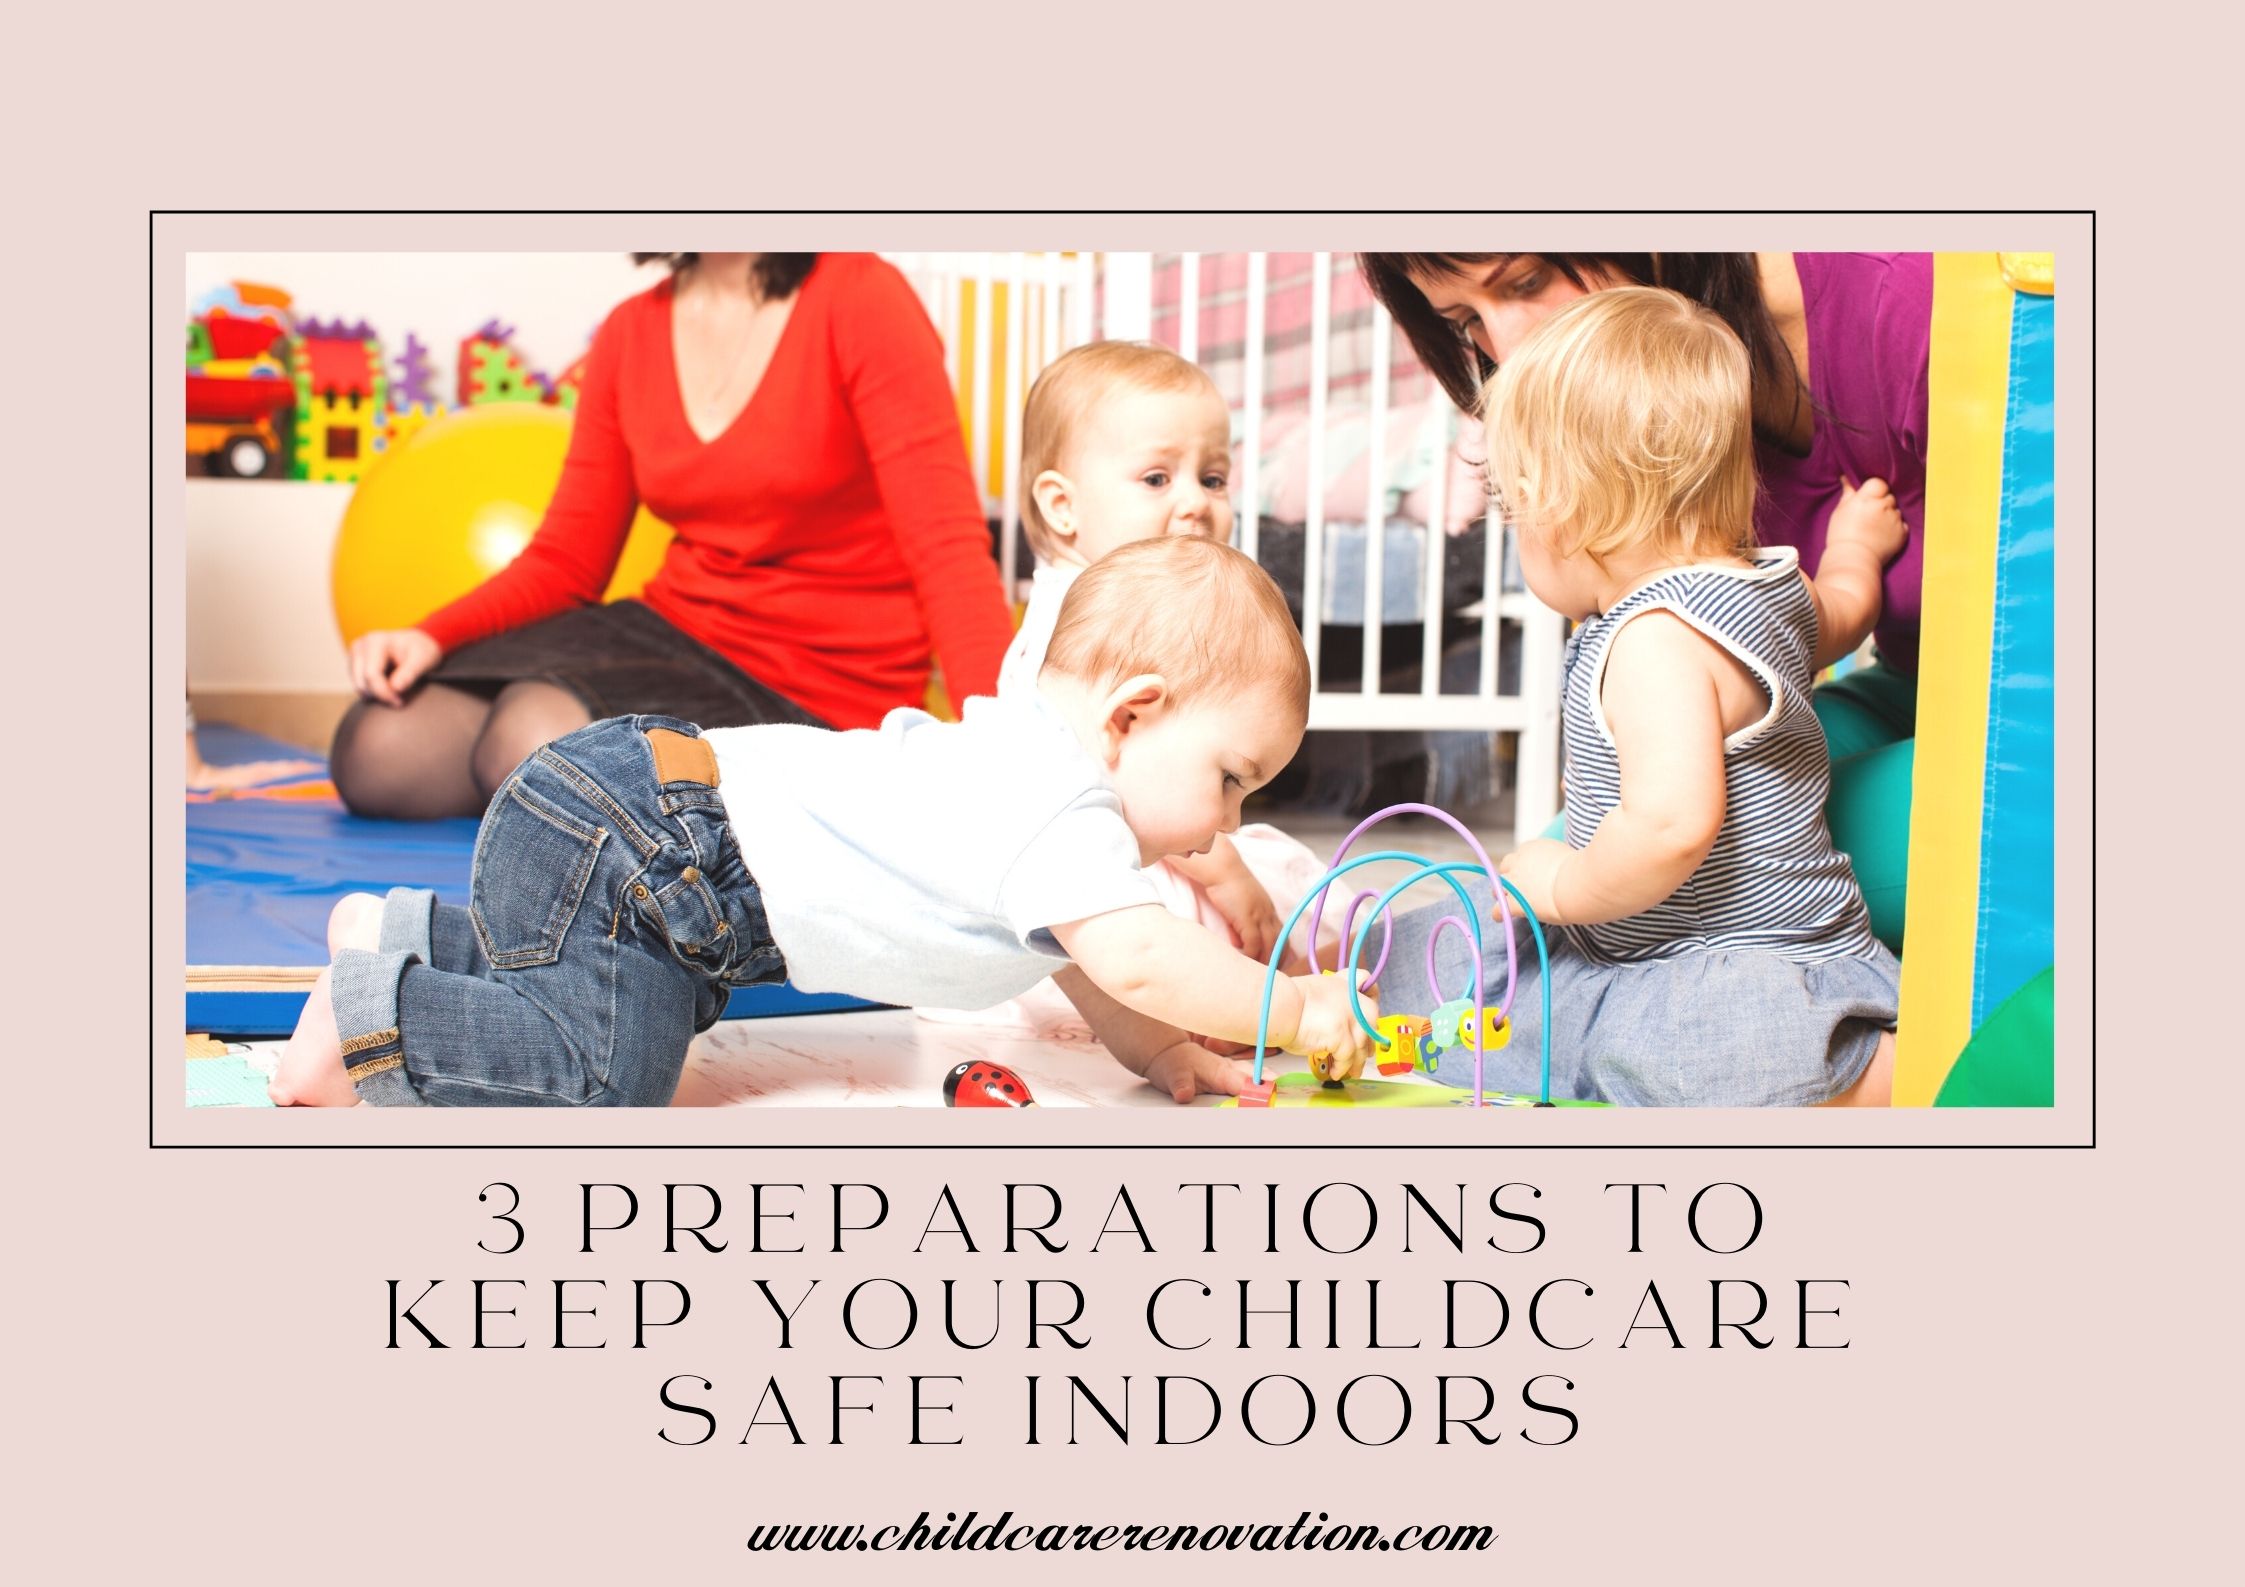 3 Preparations To Keep Your ChildCare Safe Indoors